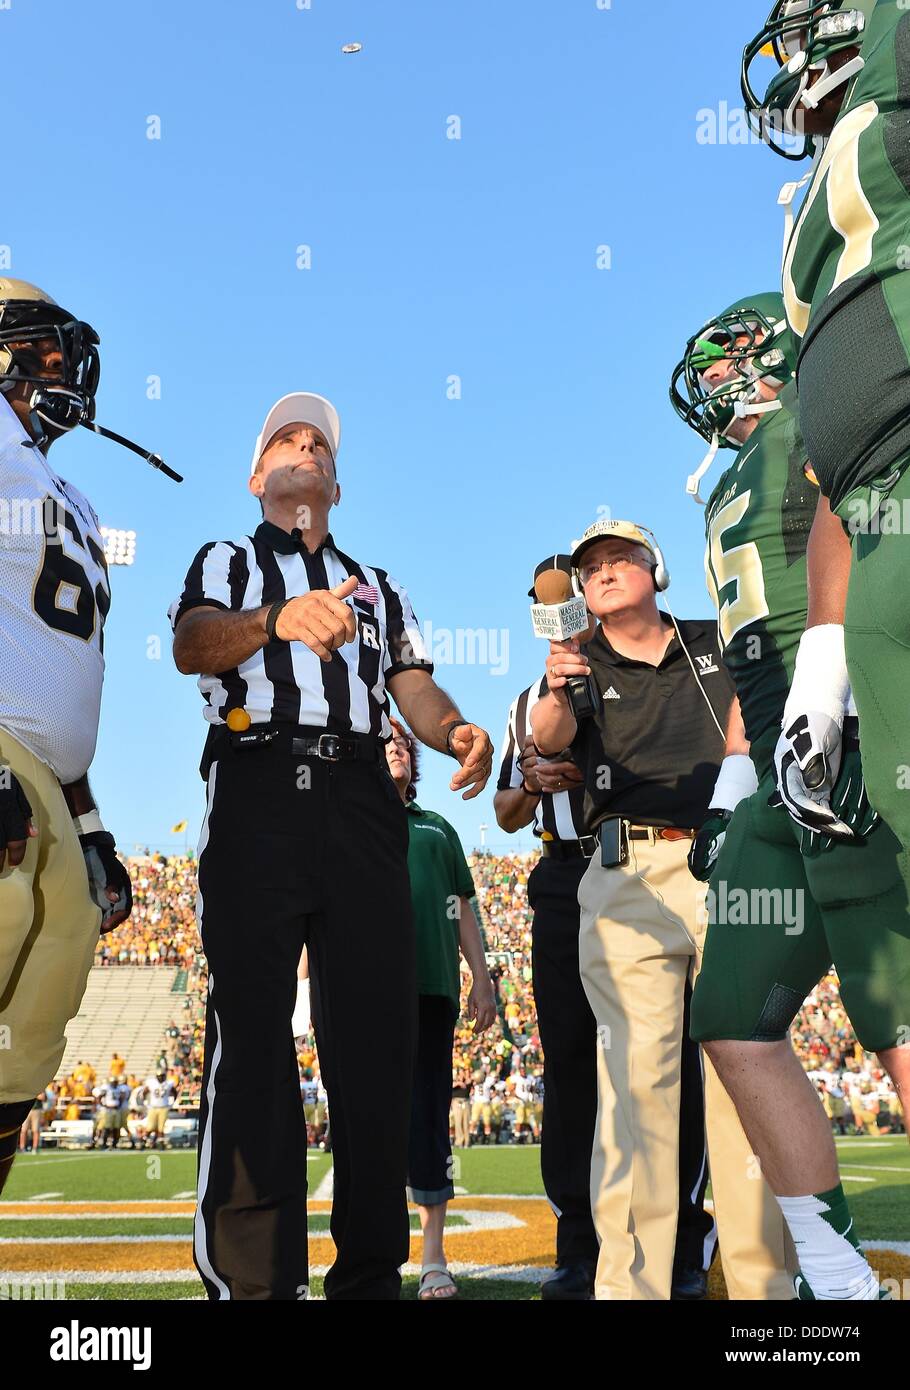 Aug. 31, 2013 - Waco, TX, United States of America - August 31 2013:..BIG 12 official performs coin toss before NCAA football game kick off at Floyd Casey Stadium in Waco, TX. Baylor leads 38-0 at the end of halftime. Stock Photo